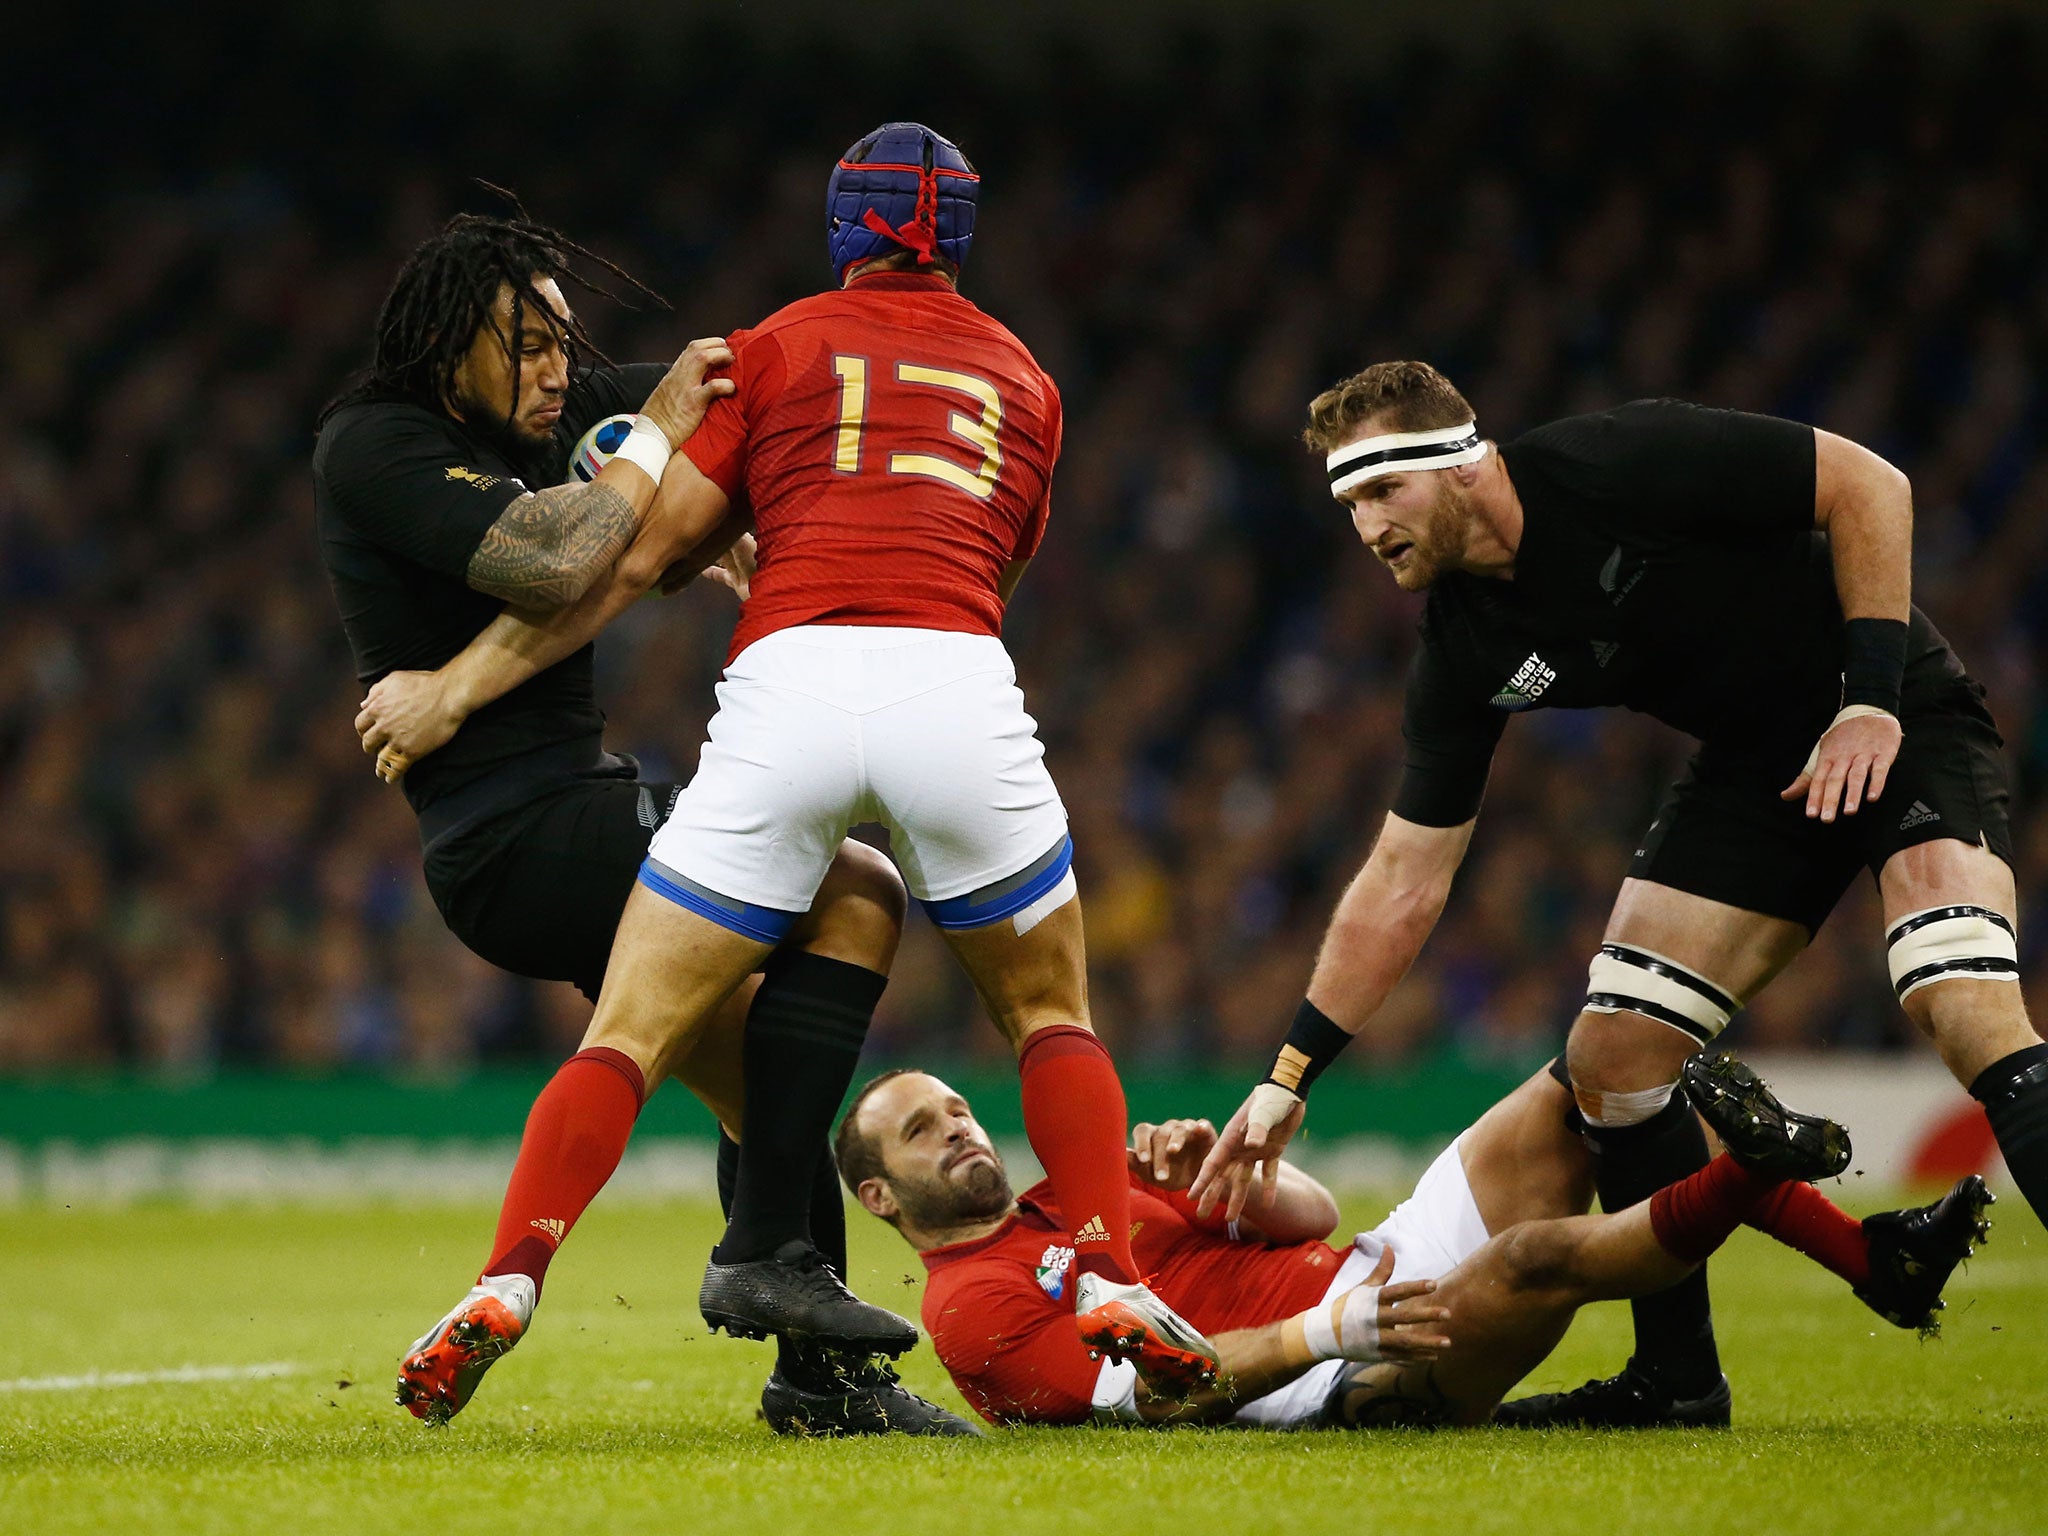 Ma'a Nonu takes the ball into contact against France